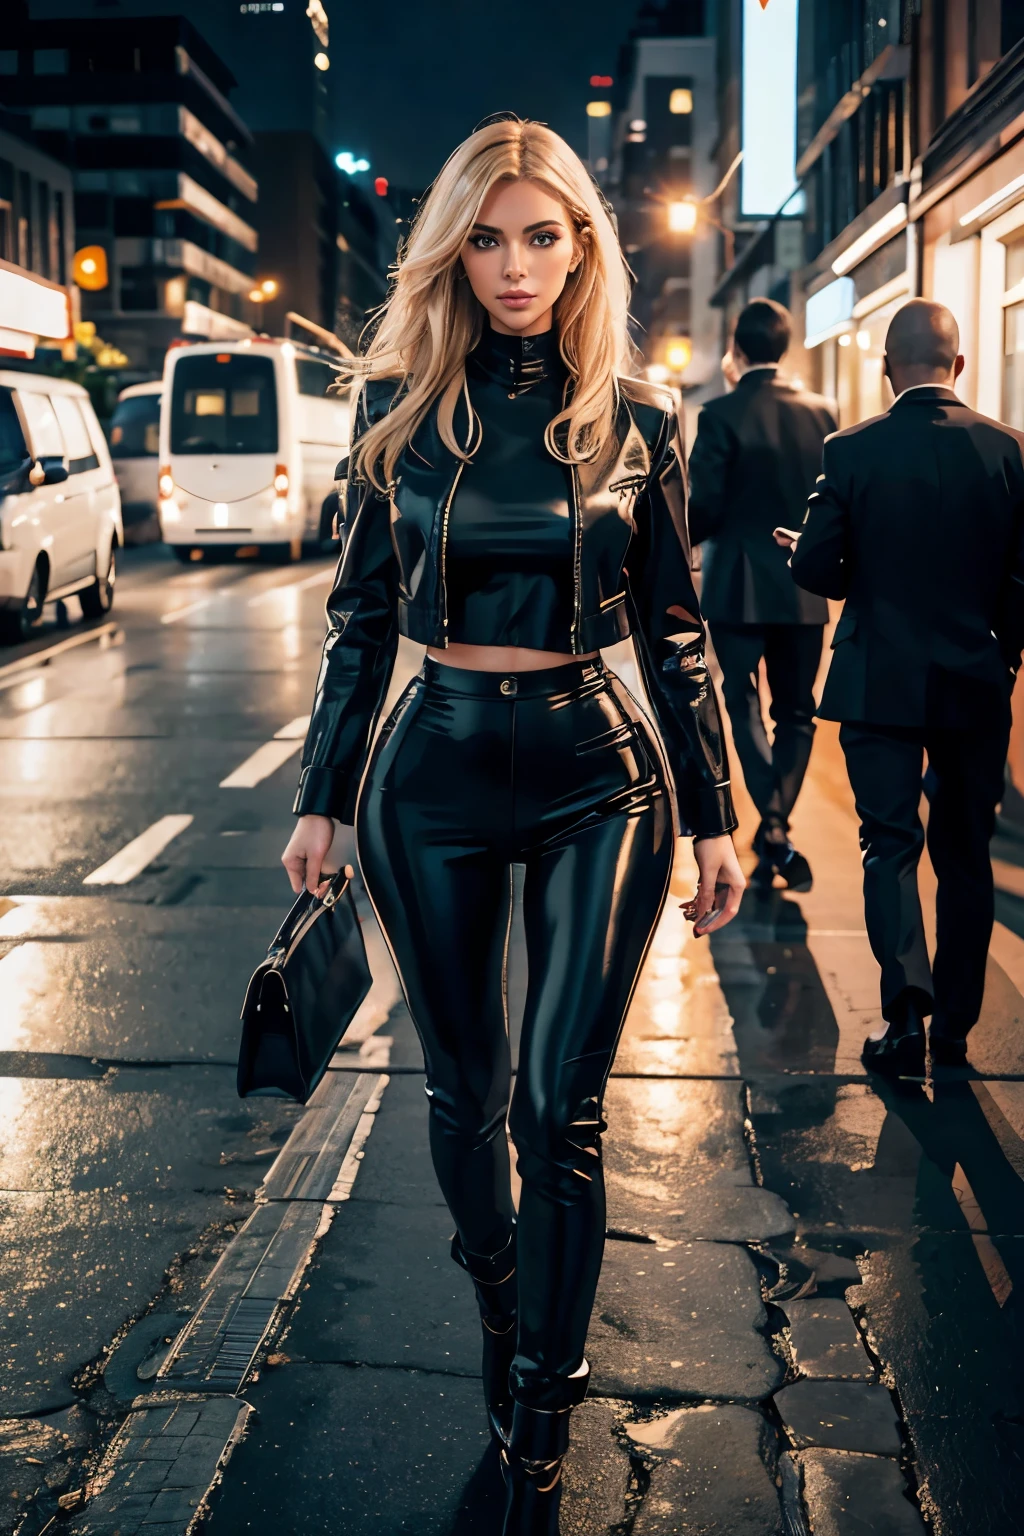 full body woman, A fashion model, Wear a suit, Glamour, paparazzi taking pictures of her, Kim Kardashian, blonde hair, elegant leather trouser suit, midnigh city, bokeh, 8K, High quality, Masterpiece, Best quality, HD, Extremely detailed, voluminetric lighting, Photorealistic, backlit on hair